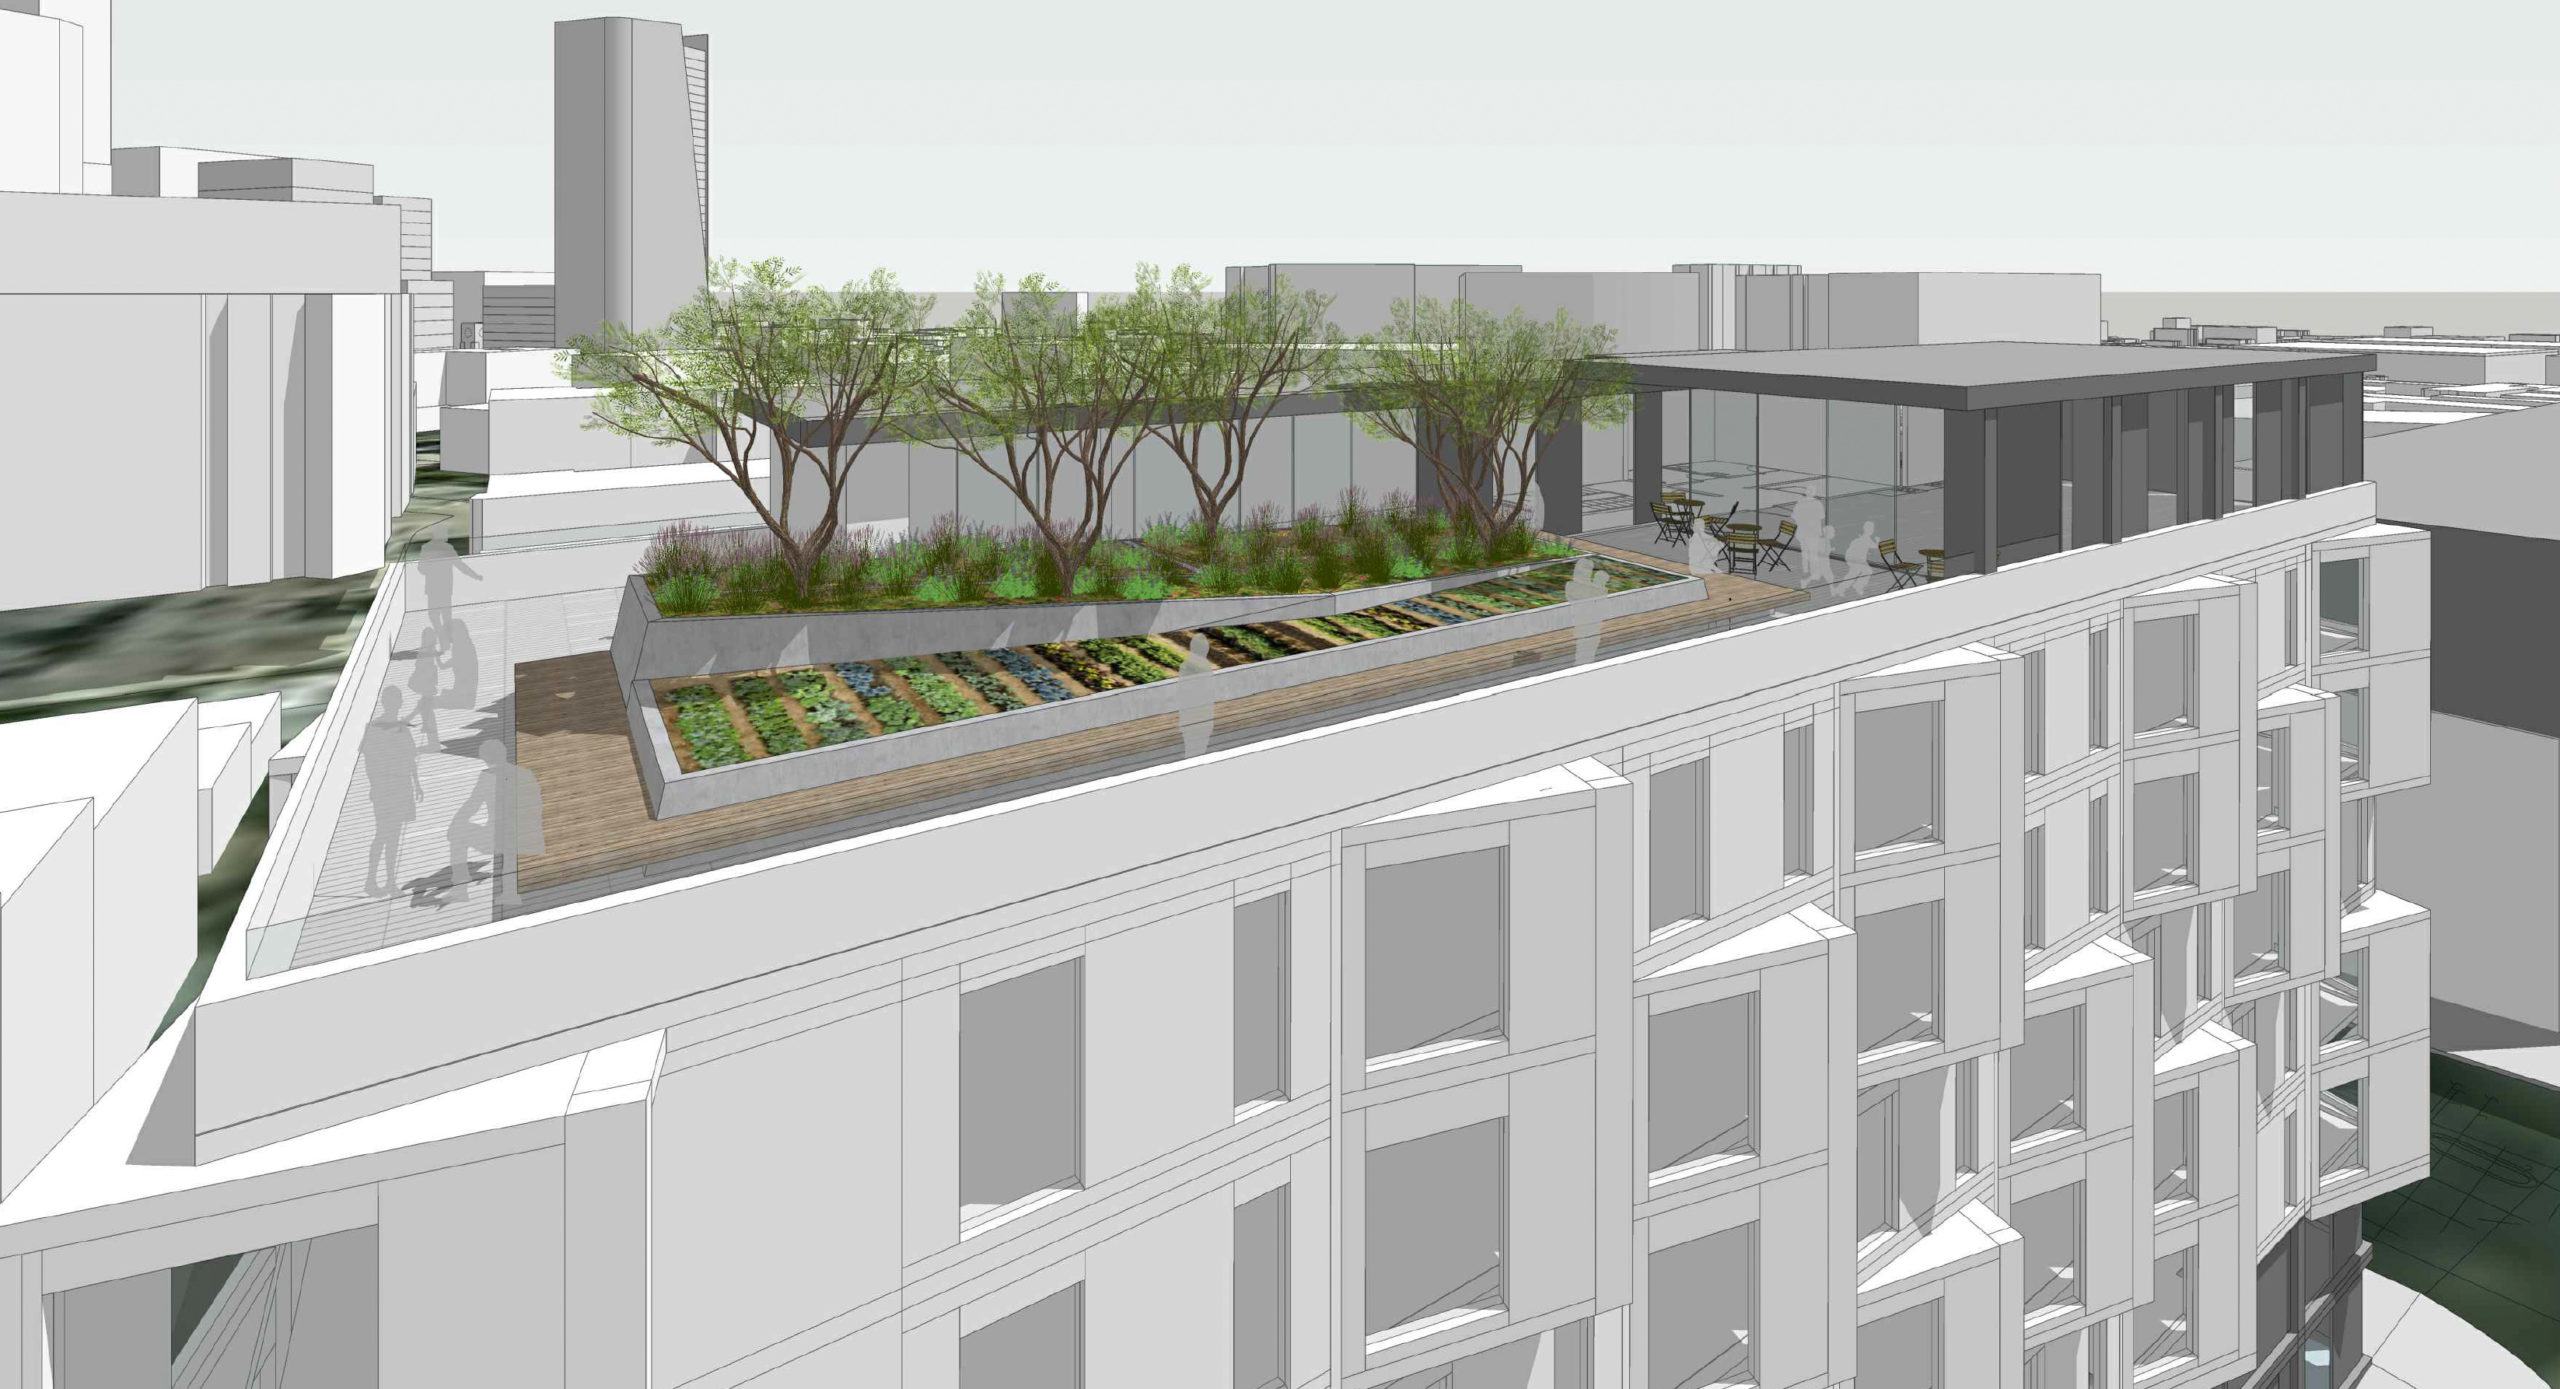 78 Haight Street roof deck, rendering by Paulett Taggart Architects